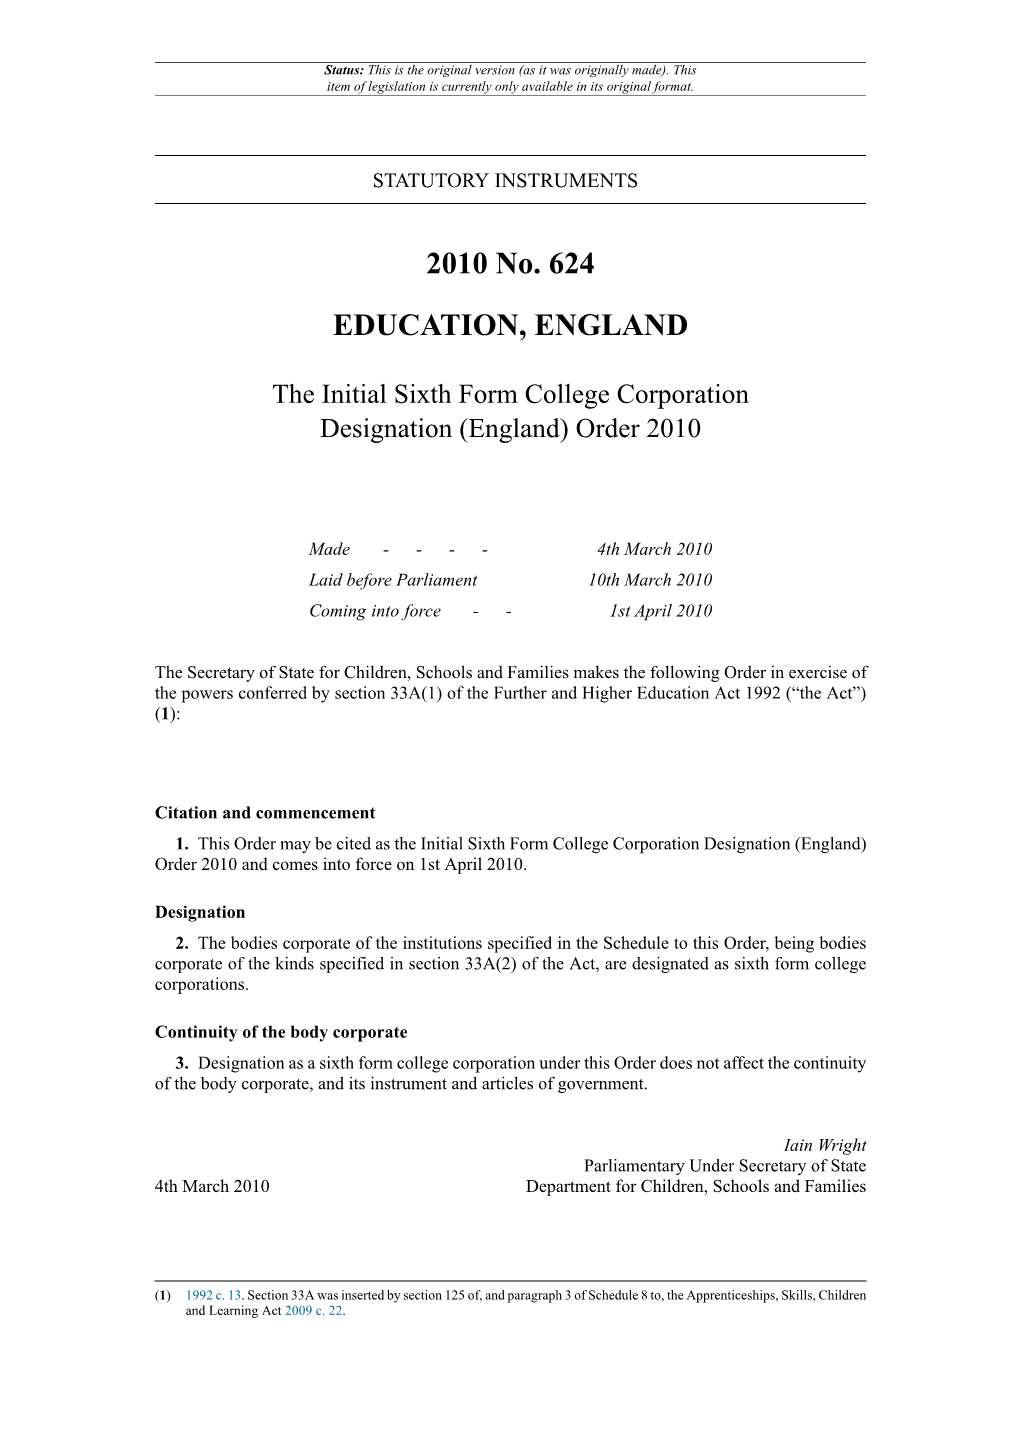 The Initial Sixth Form College Corporation Designation (England) Order 2010